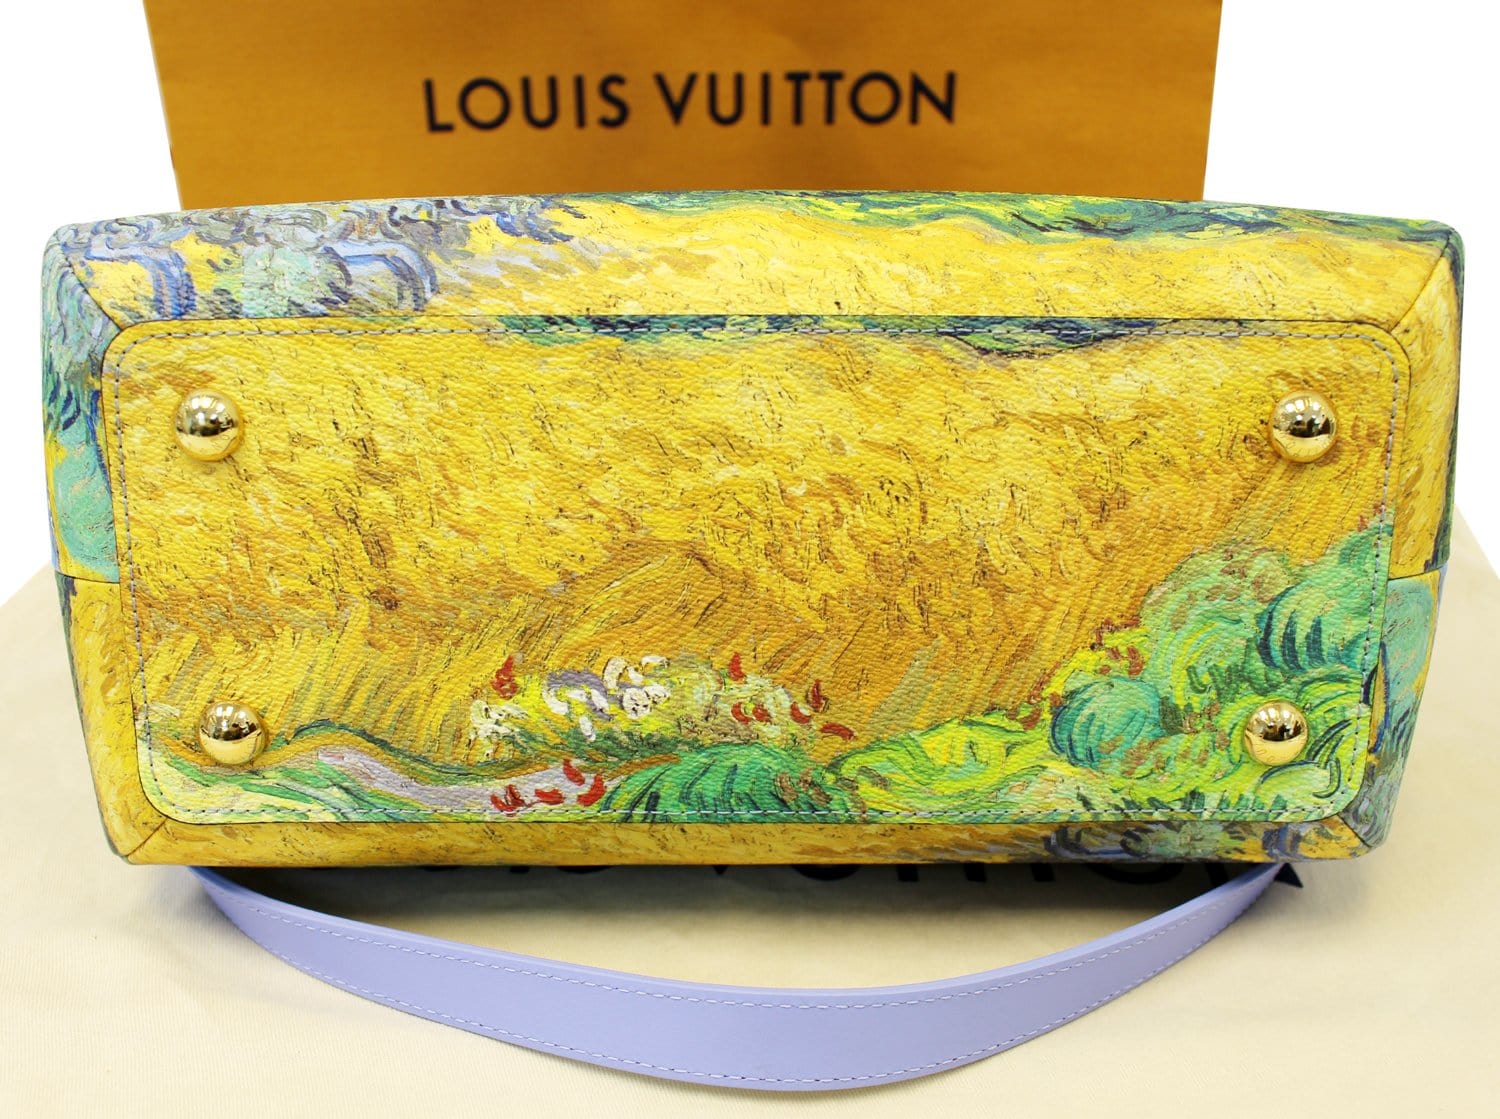 Louis Vuitton 2017 Masters Collection Neverfull MM Van Gogh - Blue Totes,  Handbags - LOU146529